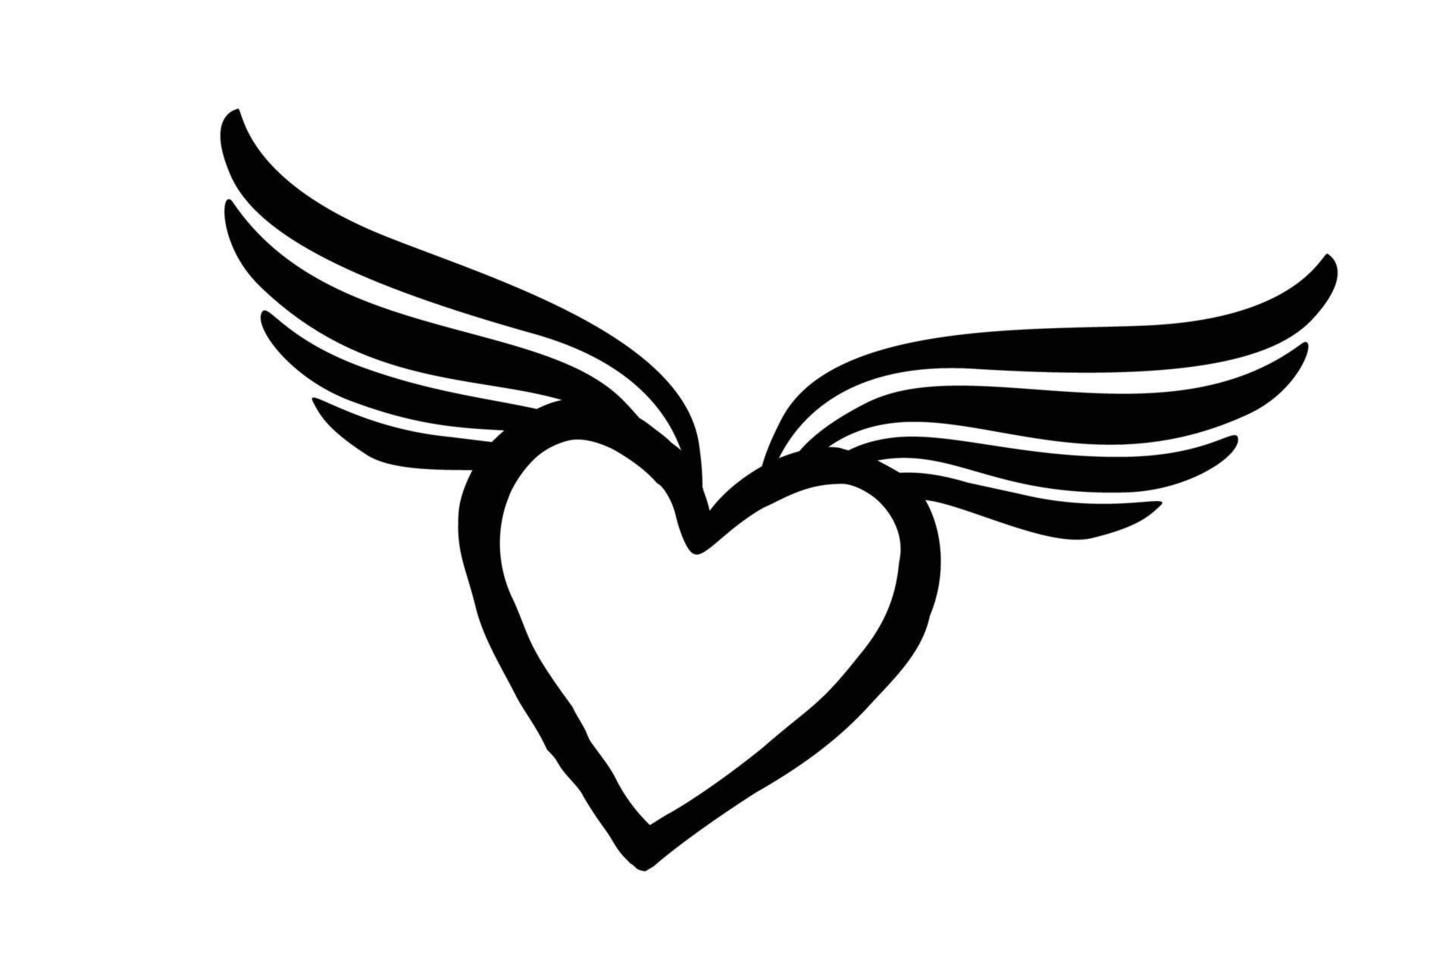 Love heart with wings. Valentine day card. Winged Love icon. Good for tattoo vector